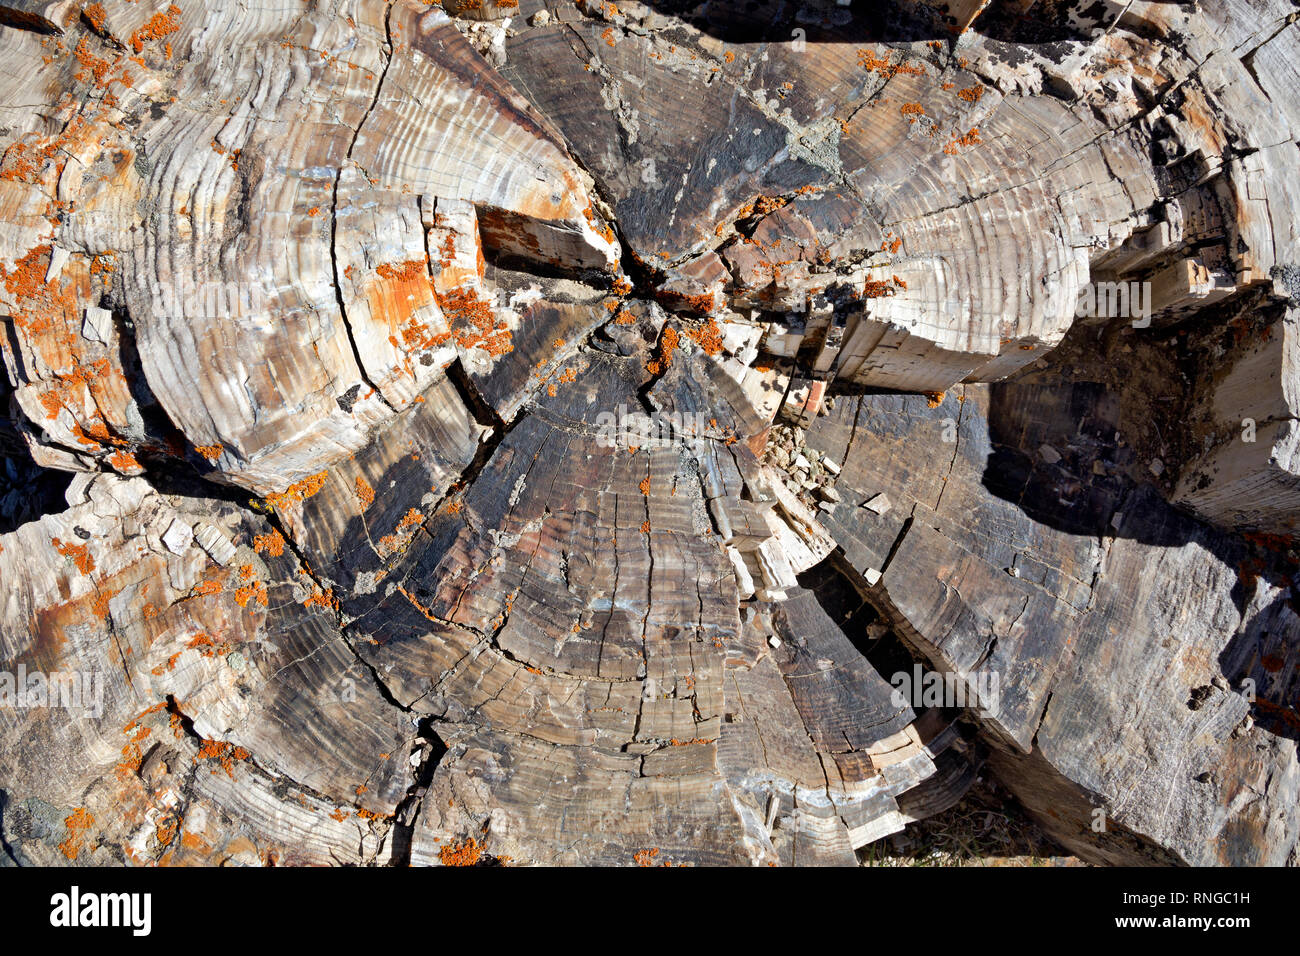 WY03802-00...WYOMING - Growth rings on a petrified tree found on Specimen Ridge, thought to be the location of the largest petrified forest in the wor Stock Photo